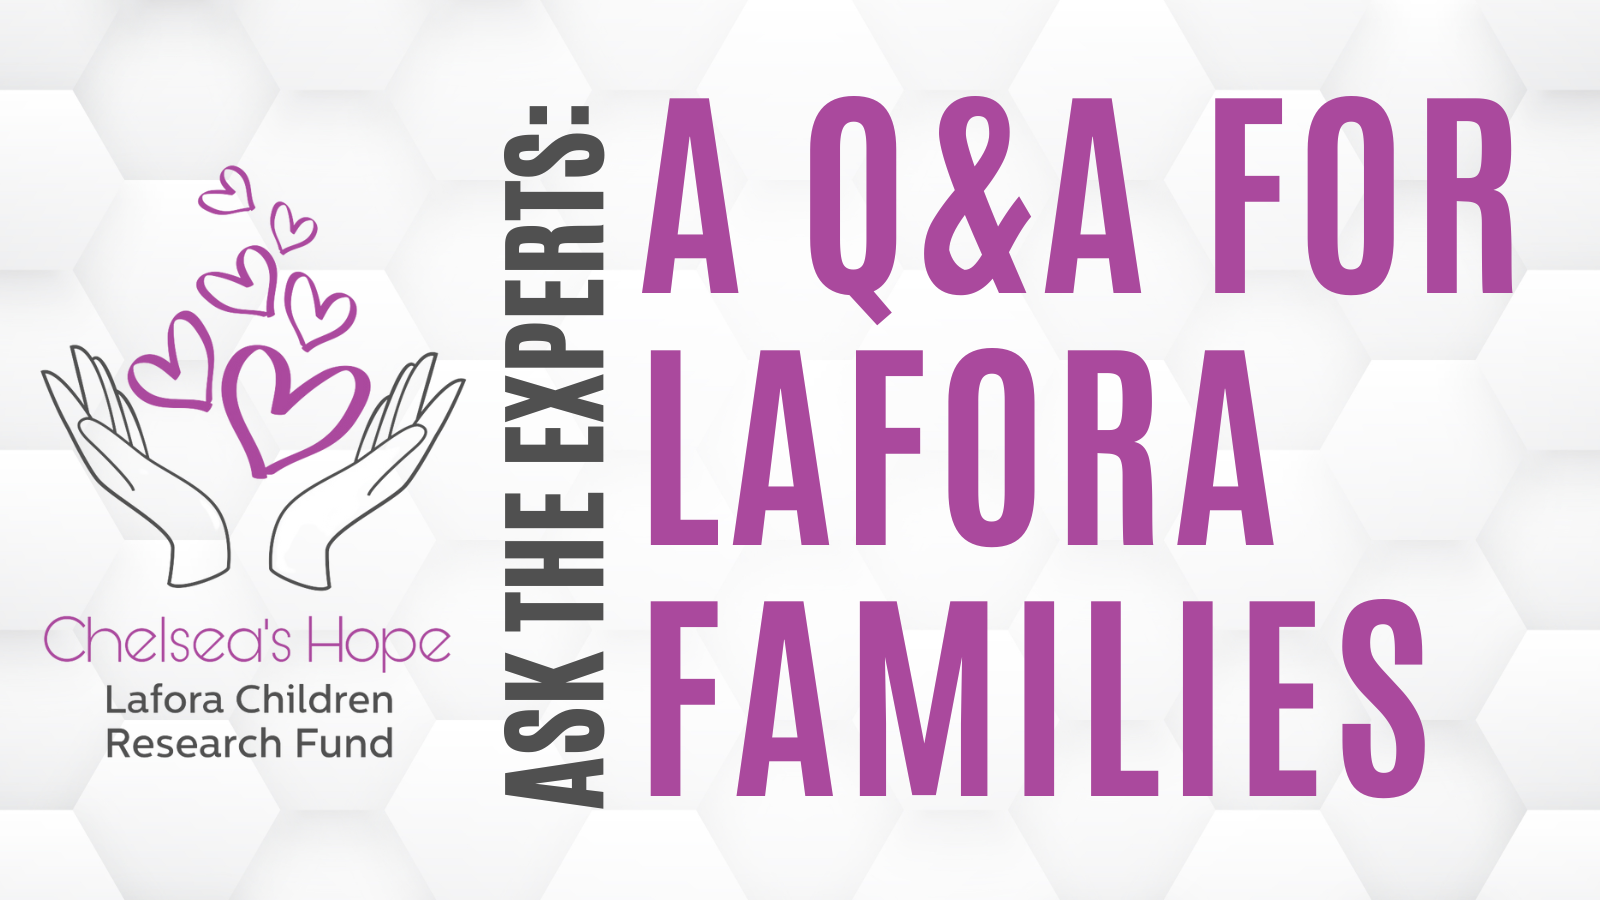 The Chelsea's Hope Lafora Children Research Fund logo is on the left. Text says 'ask the experts: a Q&A for Lafora Families' on the right.